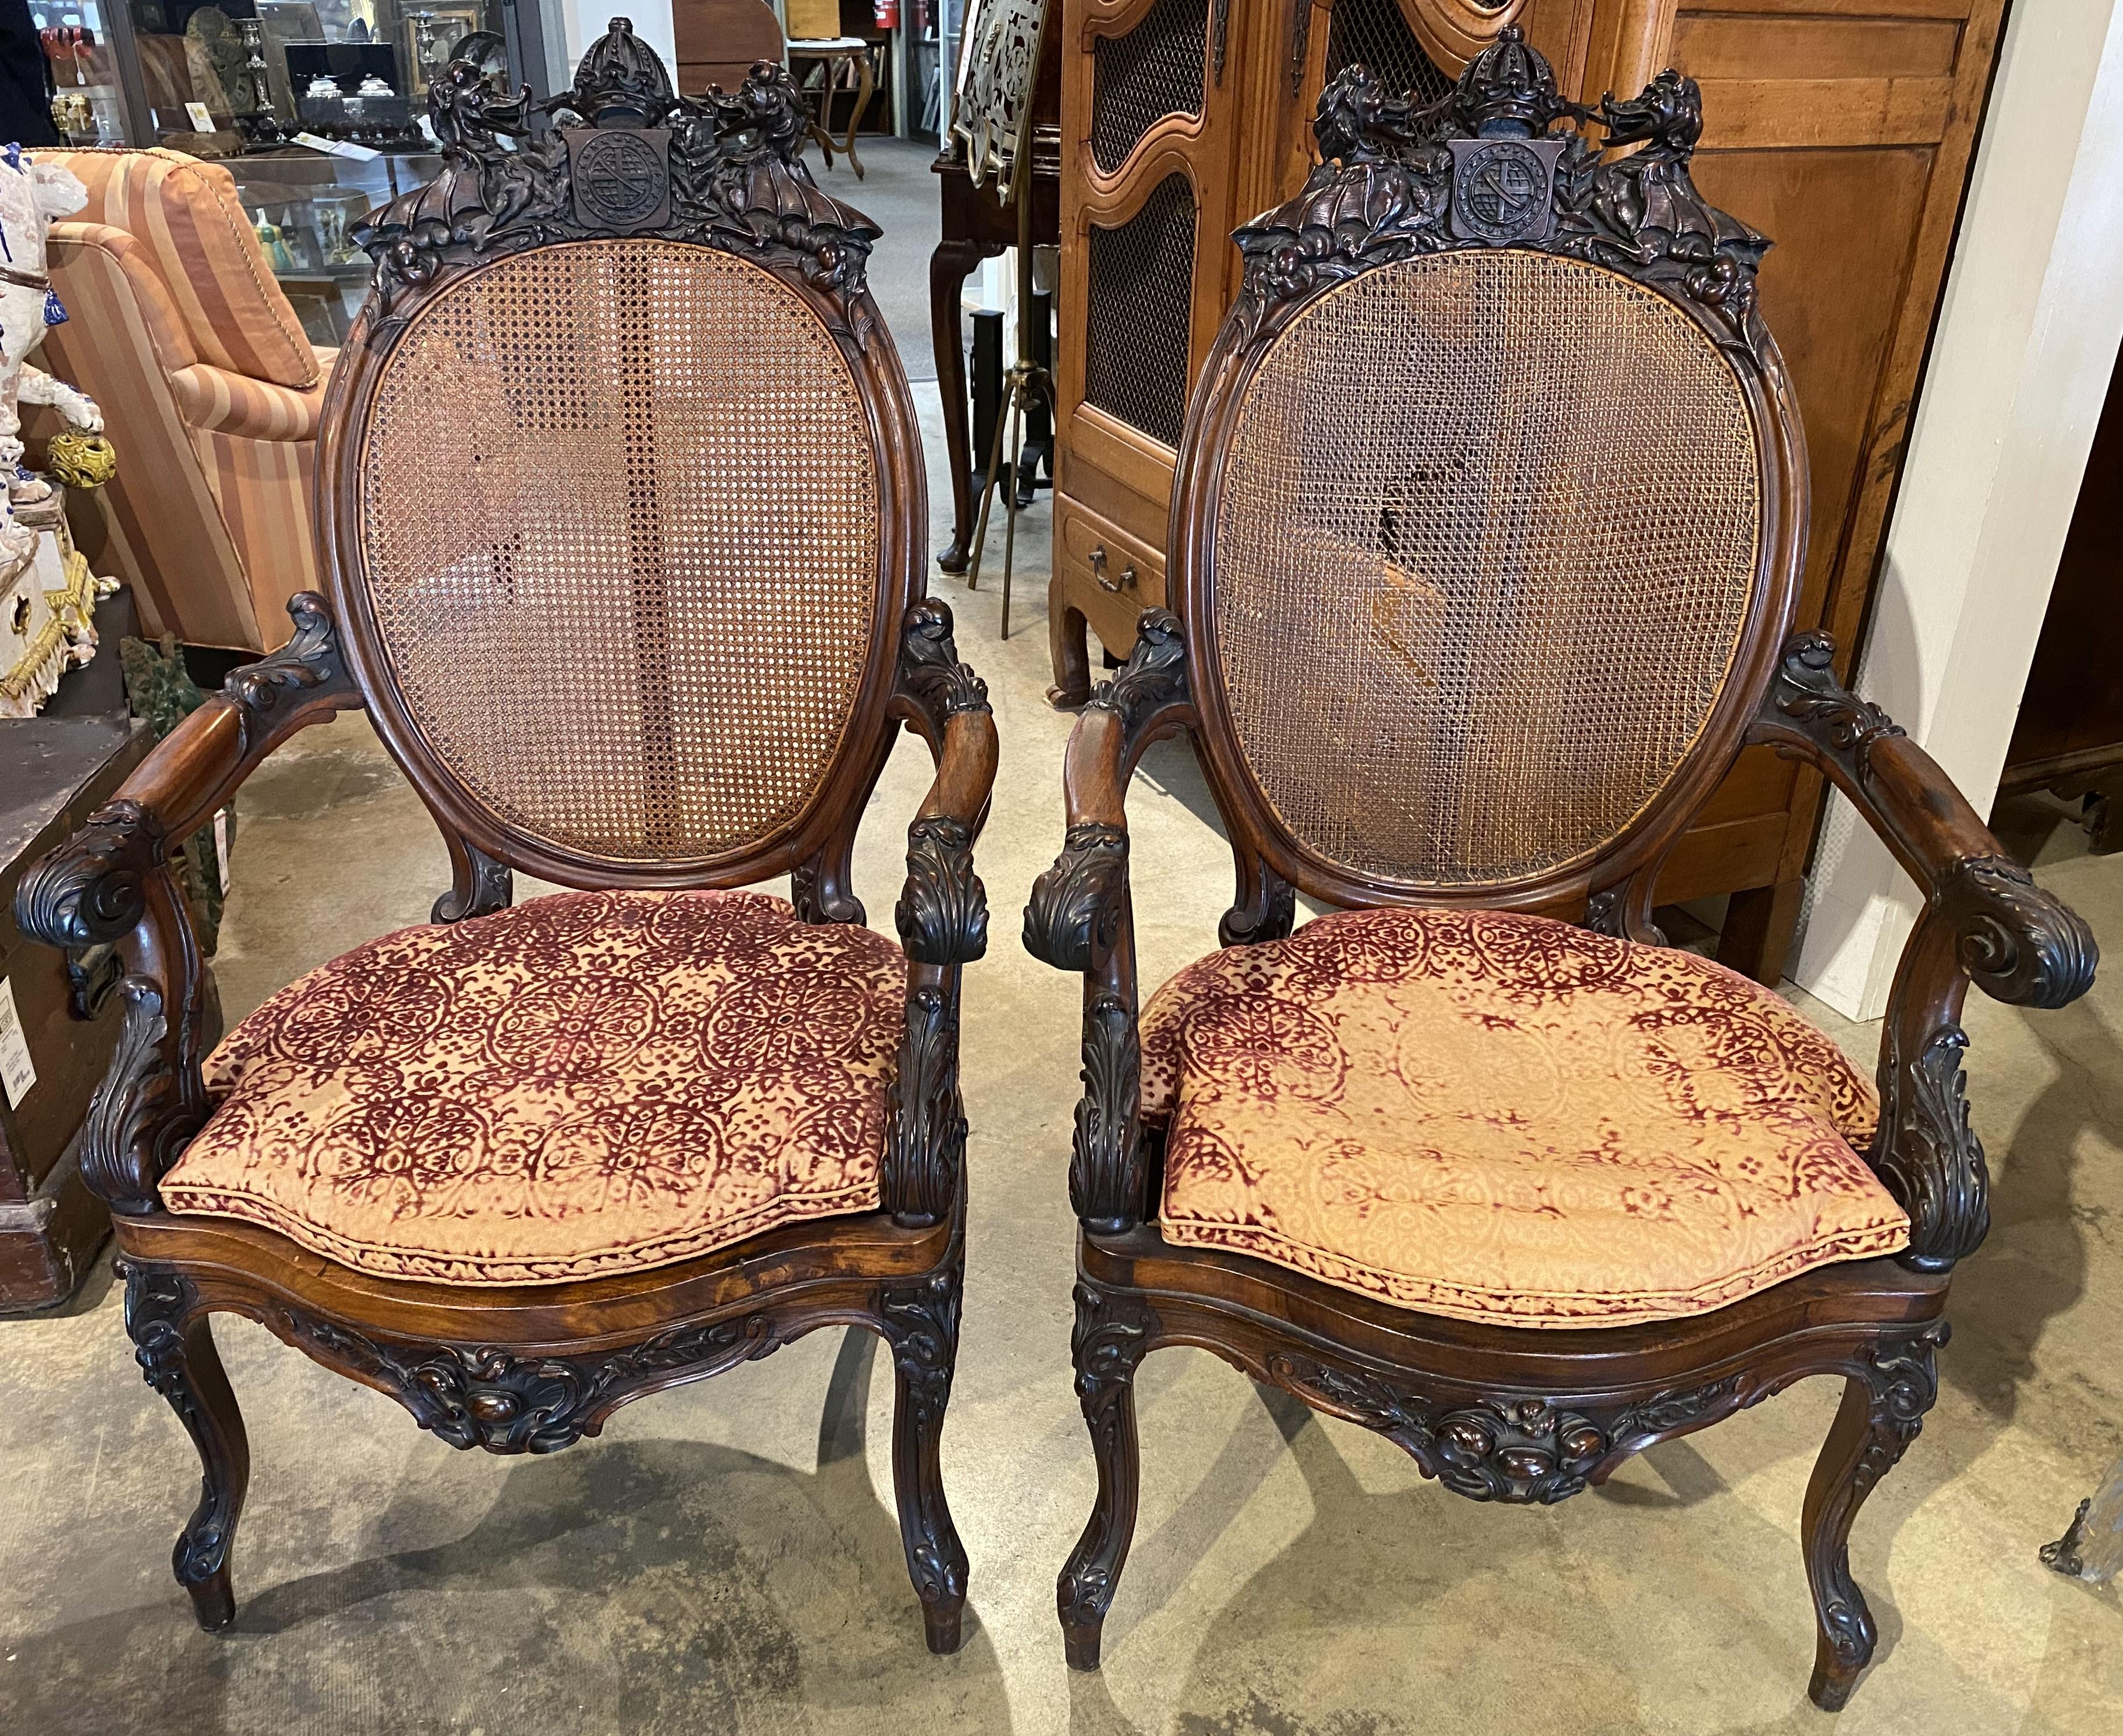 A fine pair of British walnut open armchairs with detailed carved crown & dragon crests surmounting foliate carved arms, seats and legs accented with caned backs and seats, with thin upholstered custom cushions. The pair date to the 19th century and